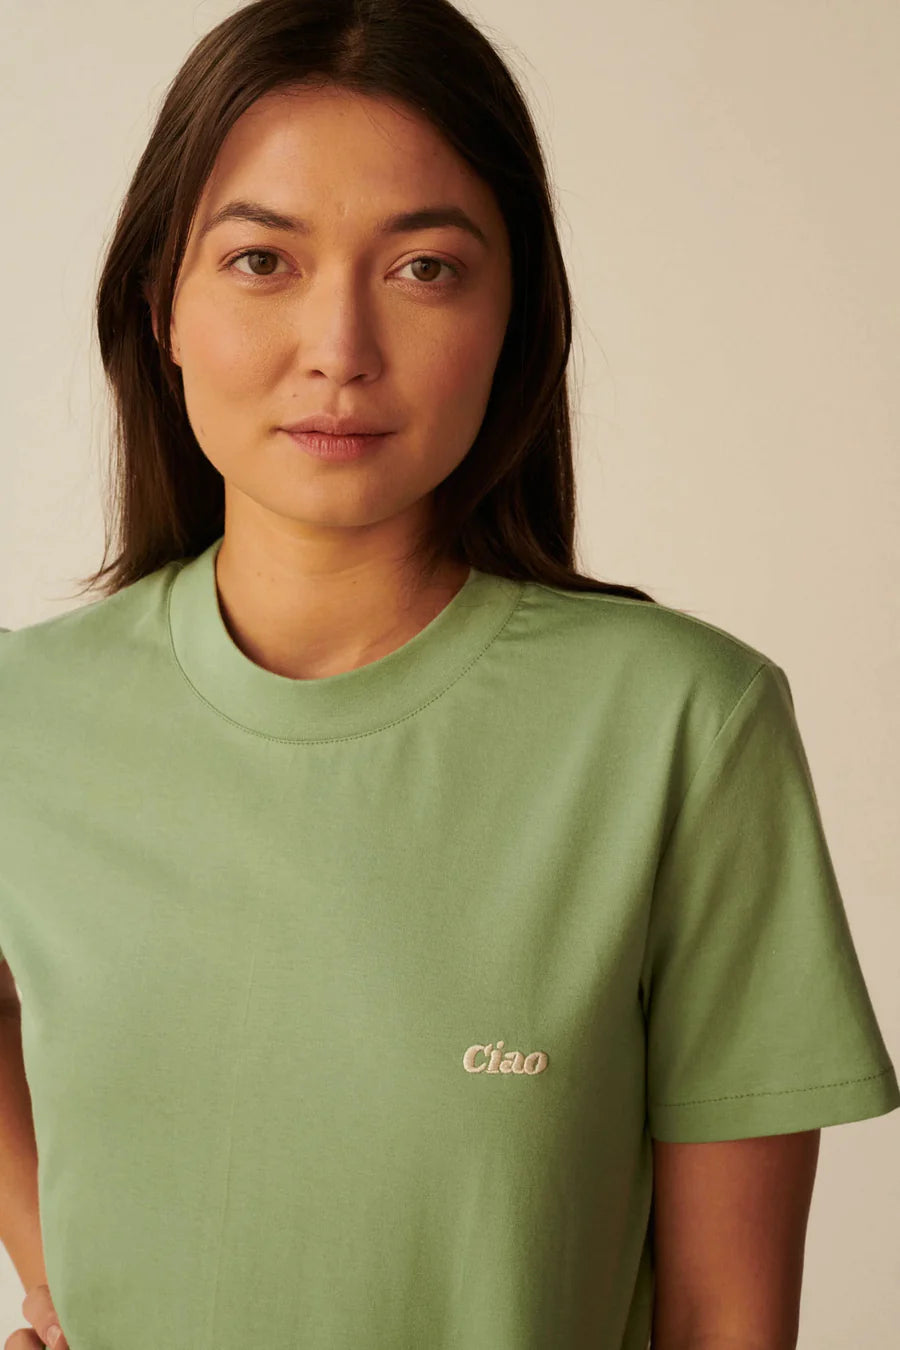 Les Goodies - She Is Sunday Ciao Tee Embroidery